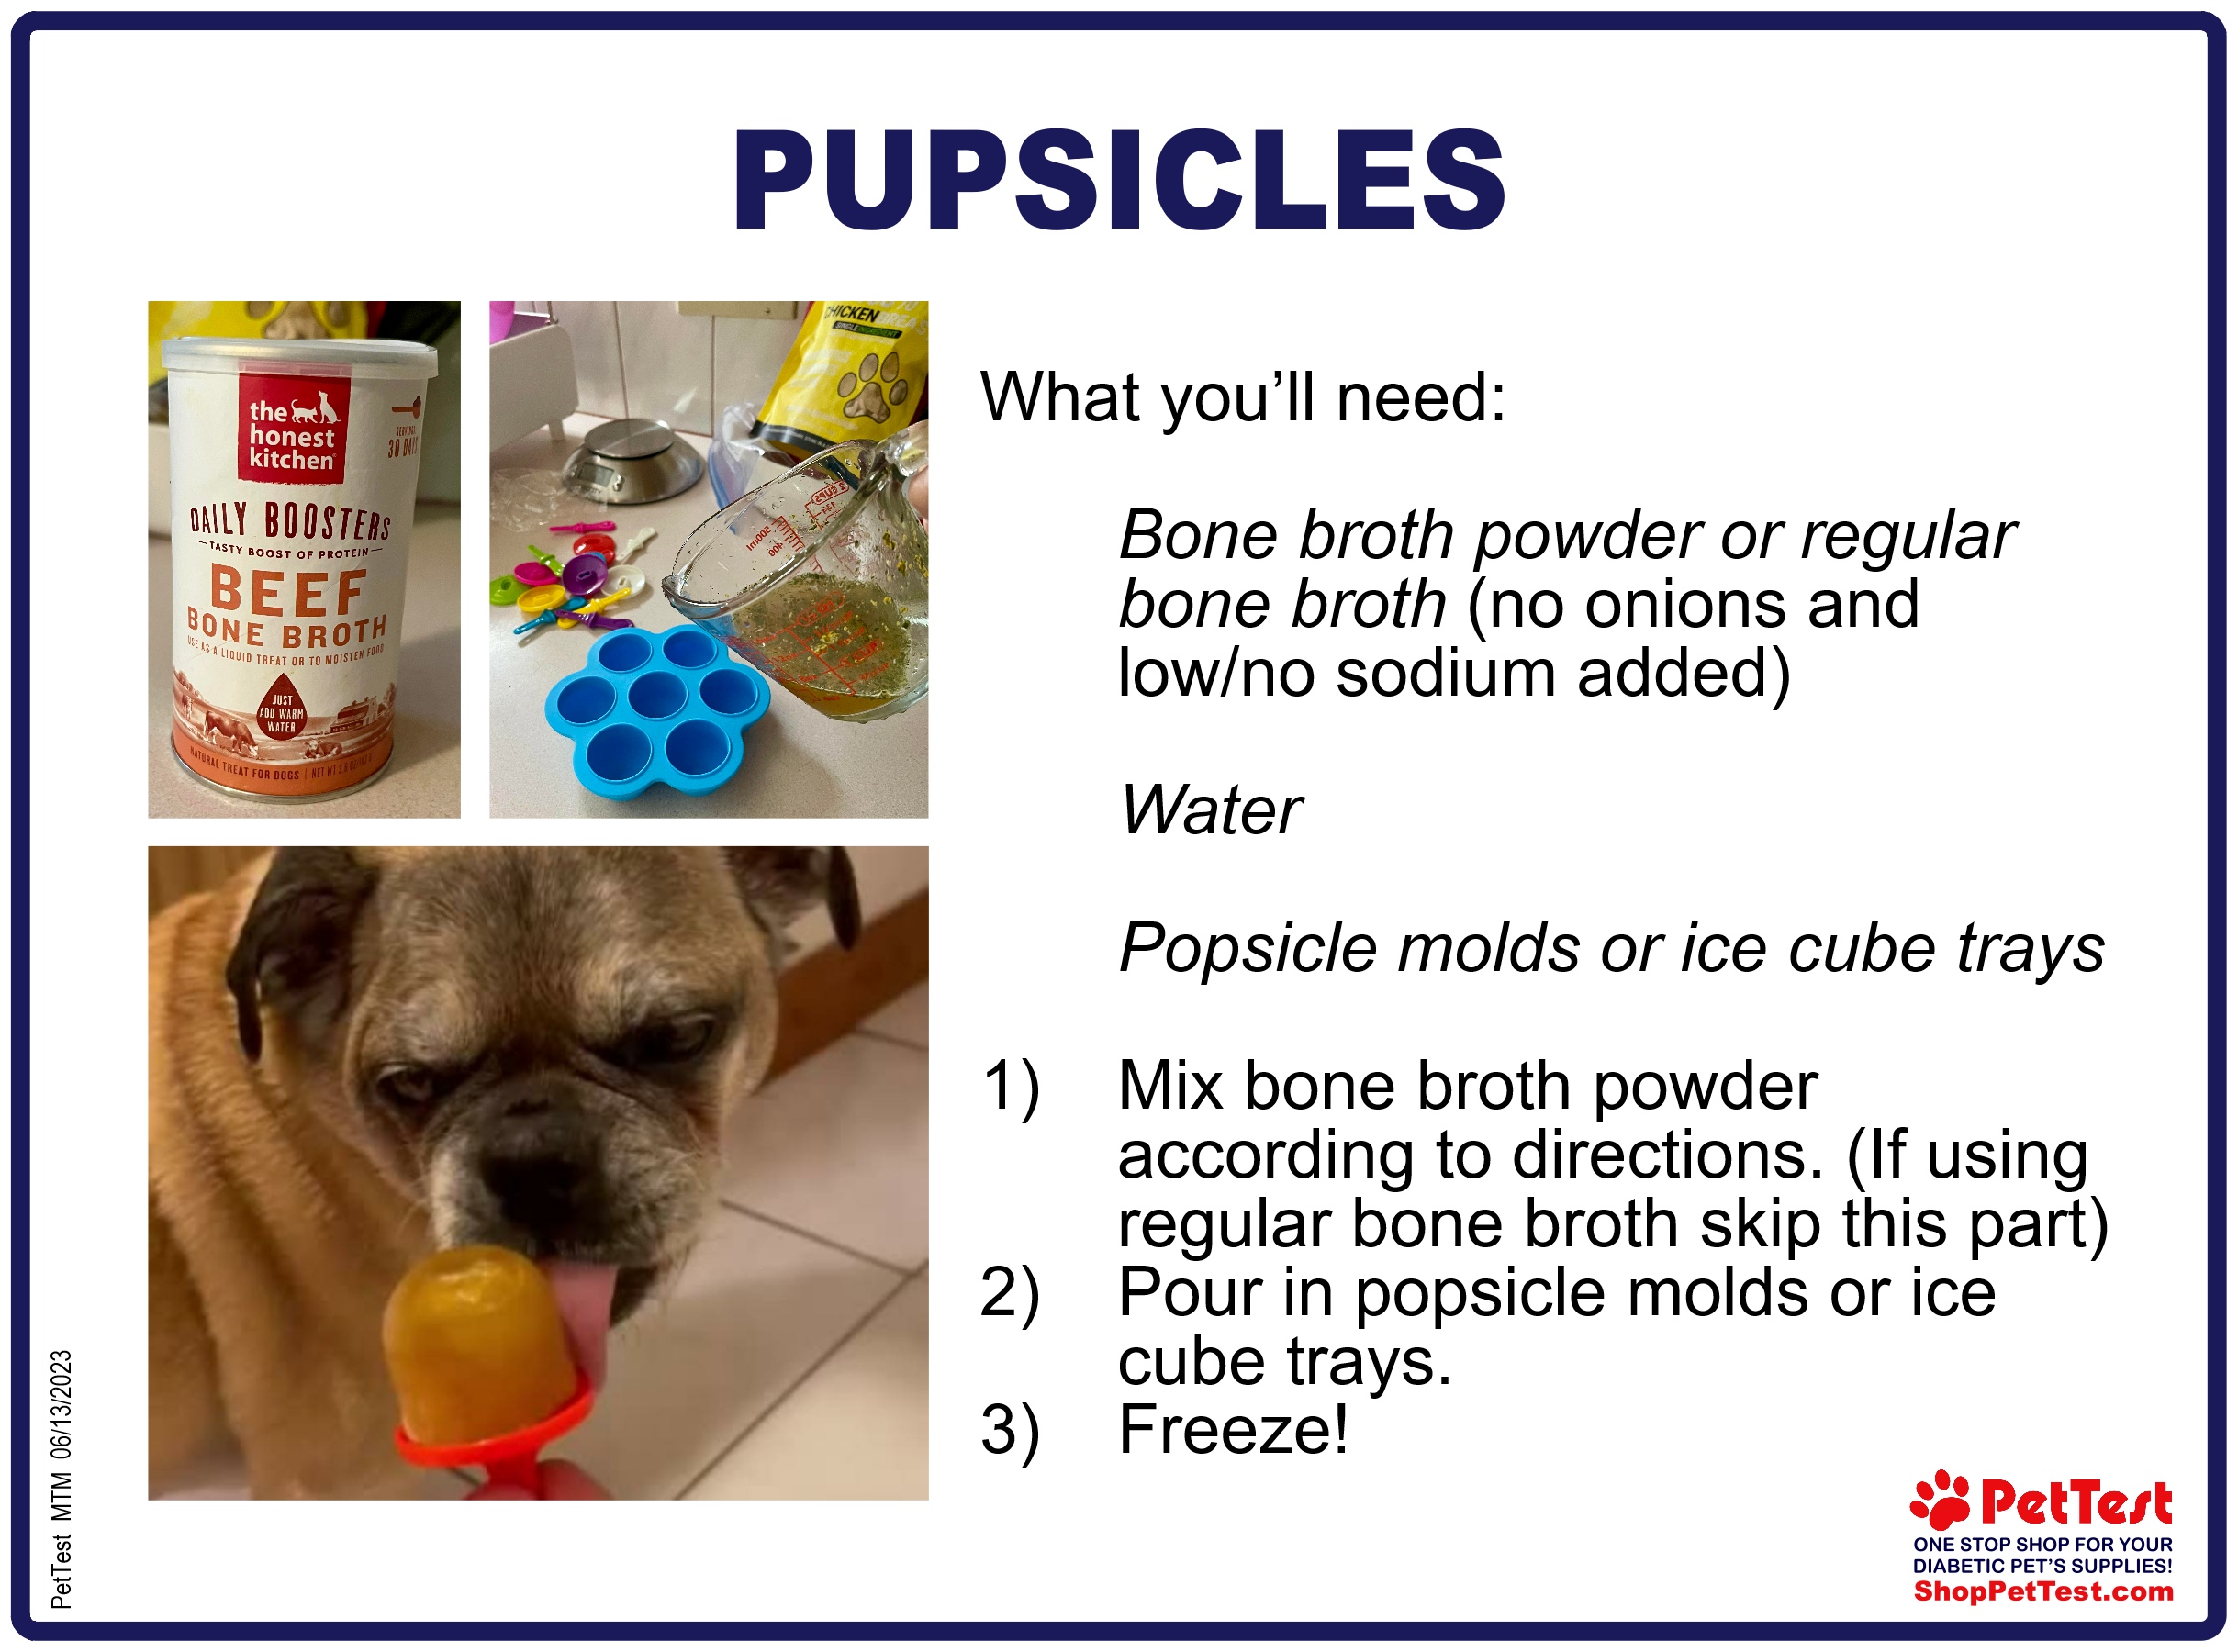 Pupsicles - Getting Ready for Summer blog